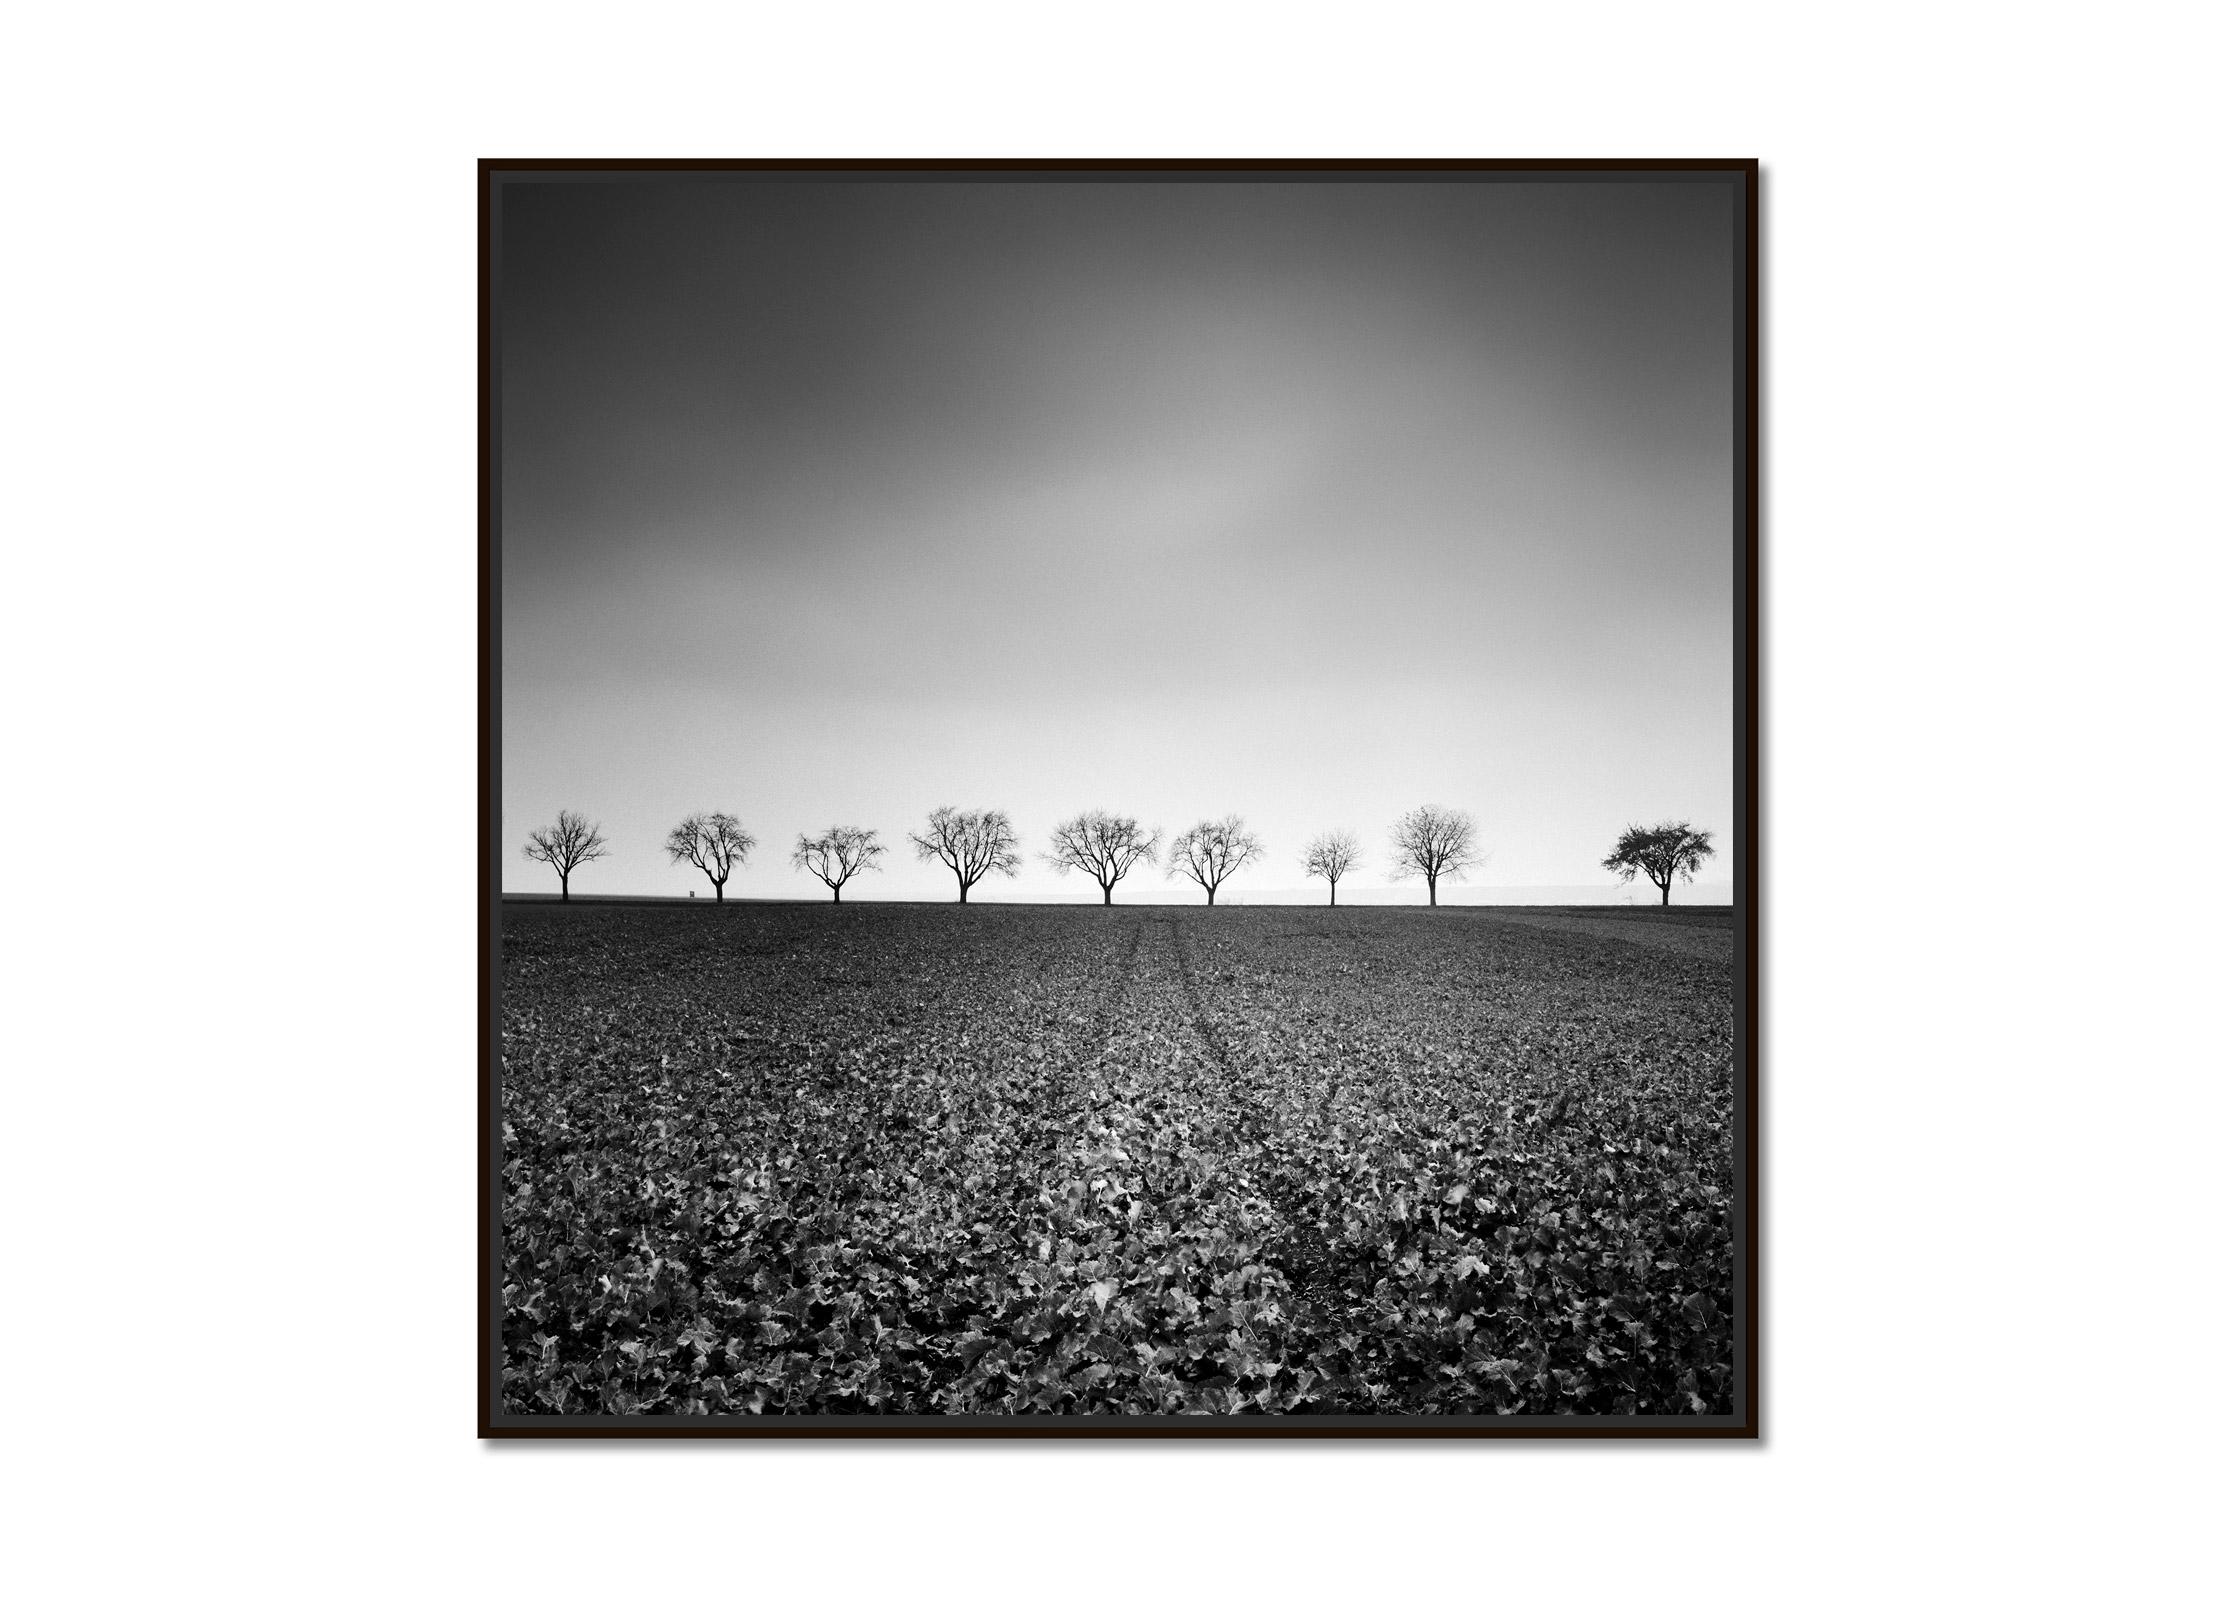 Nine Cherry Trees, Avenue, Austria, black and white landscape photography - Photograph by Gerald Berghammer